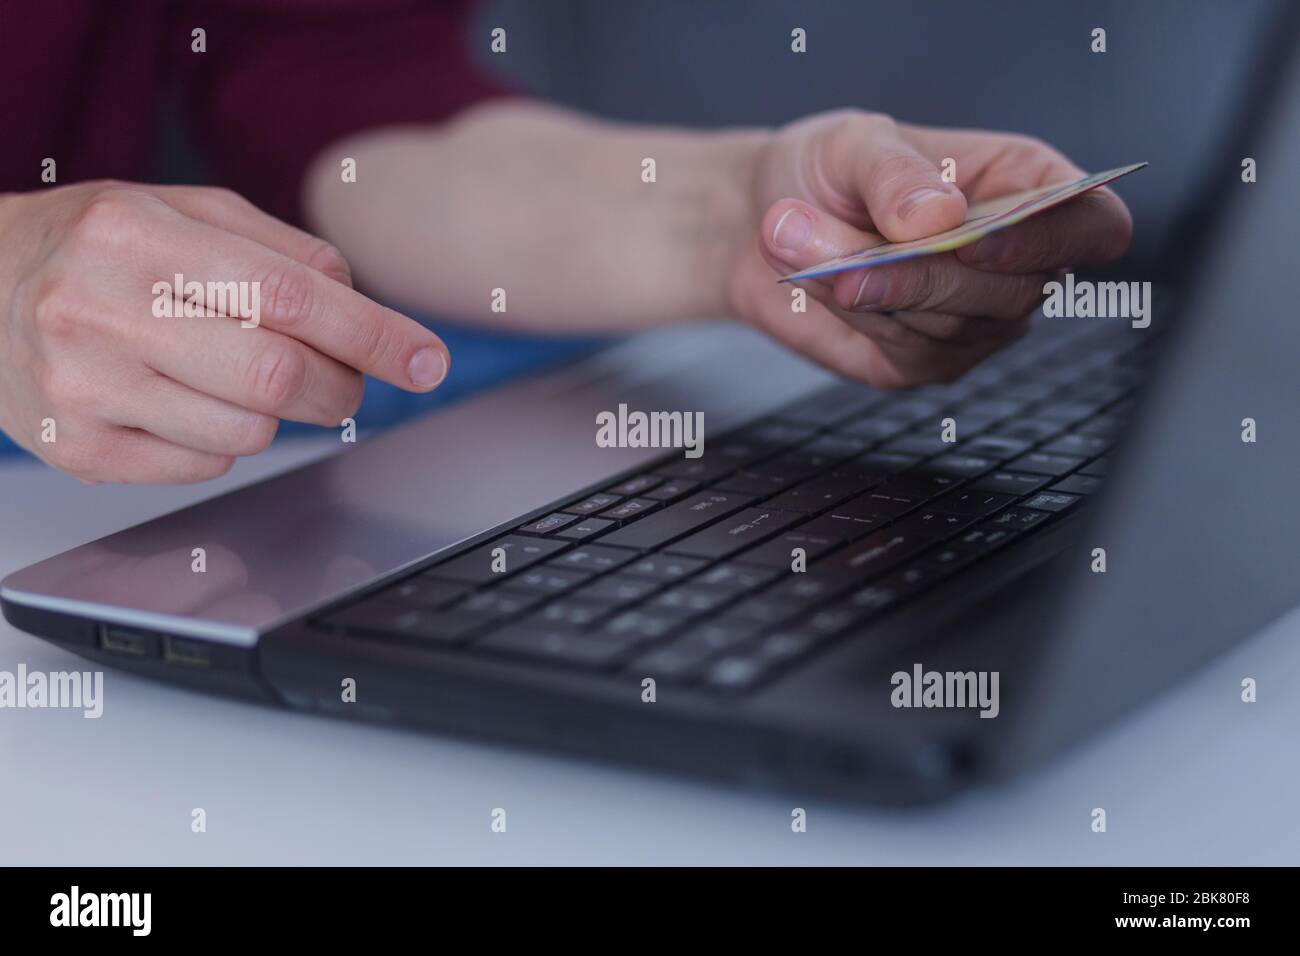 Hands holding credit card and using laptop. Online shopping Stock Photo